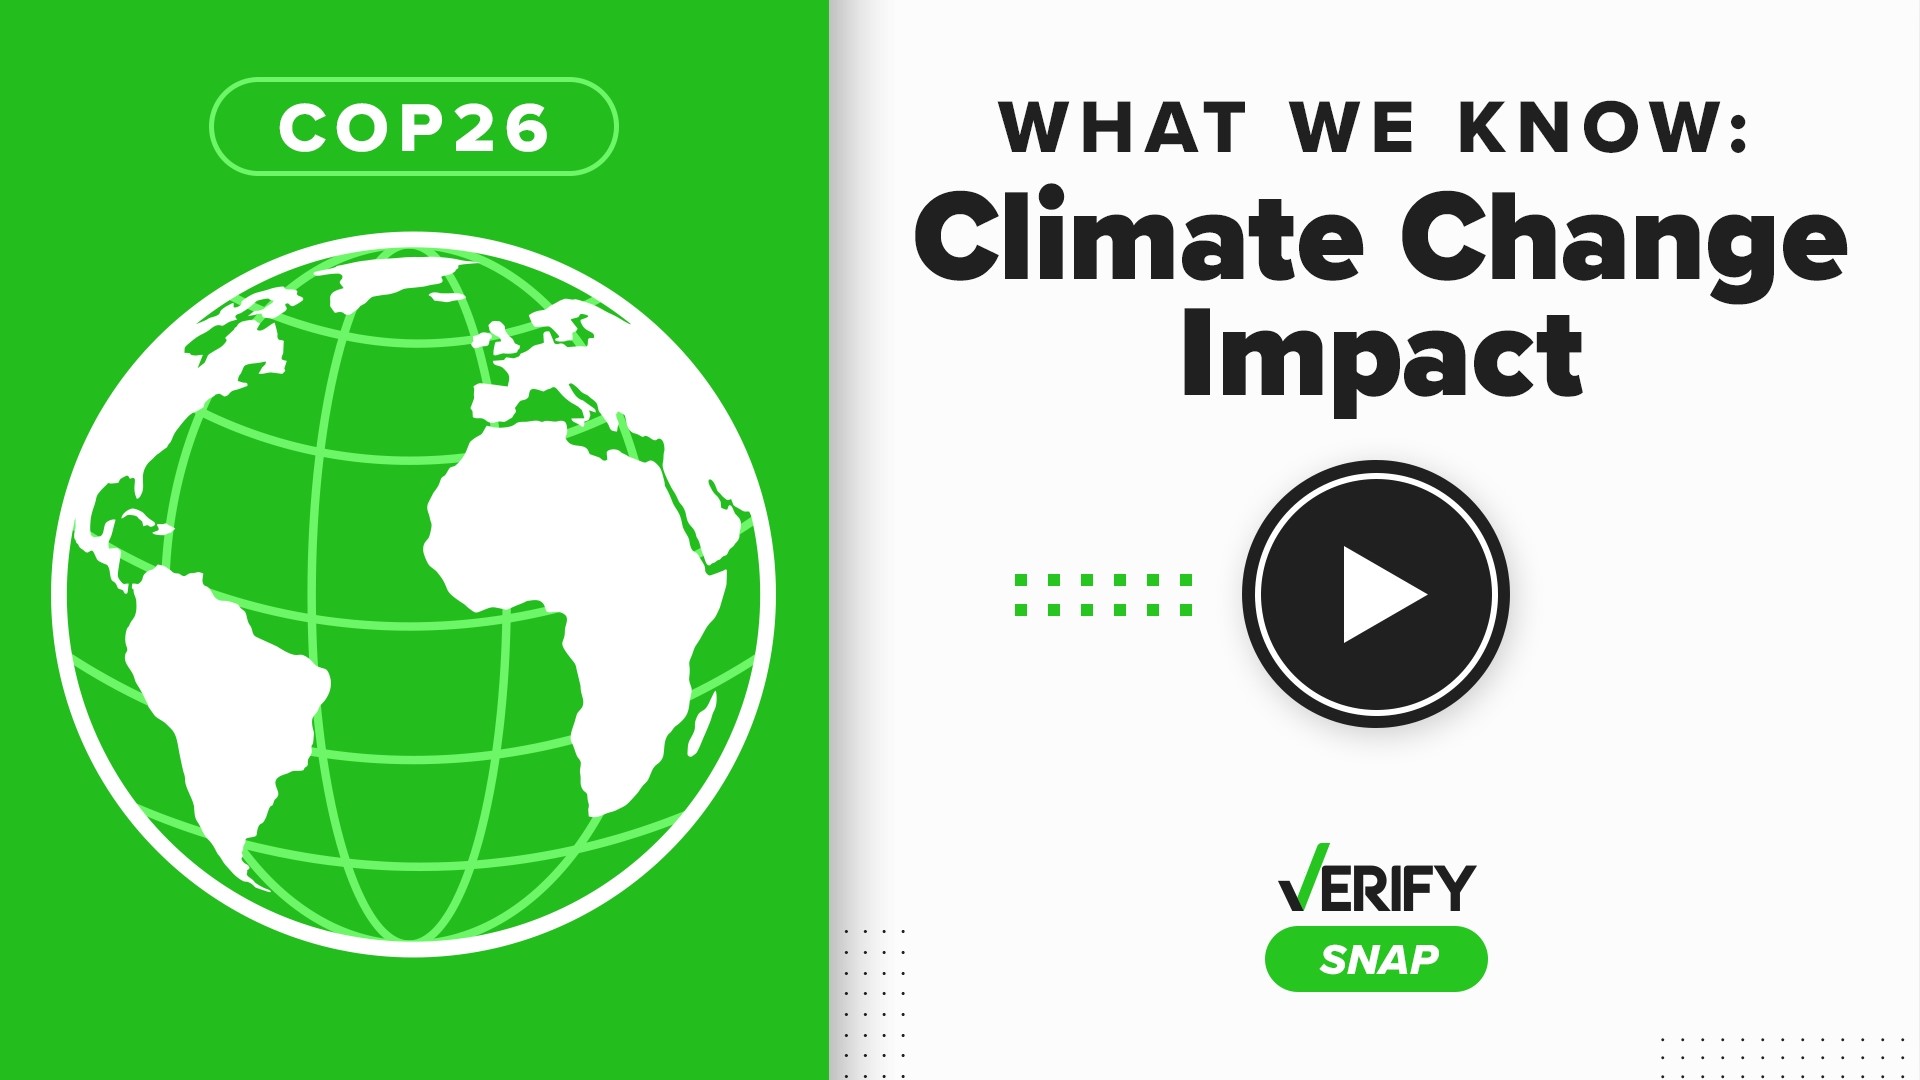 This week on Snapchat, we talked about the goals of COP26. Scientists have stated that global warming has dire consequences if the world doesn't stay below 2ºC.